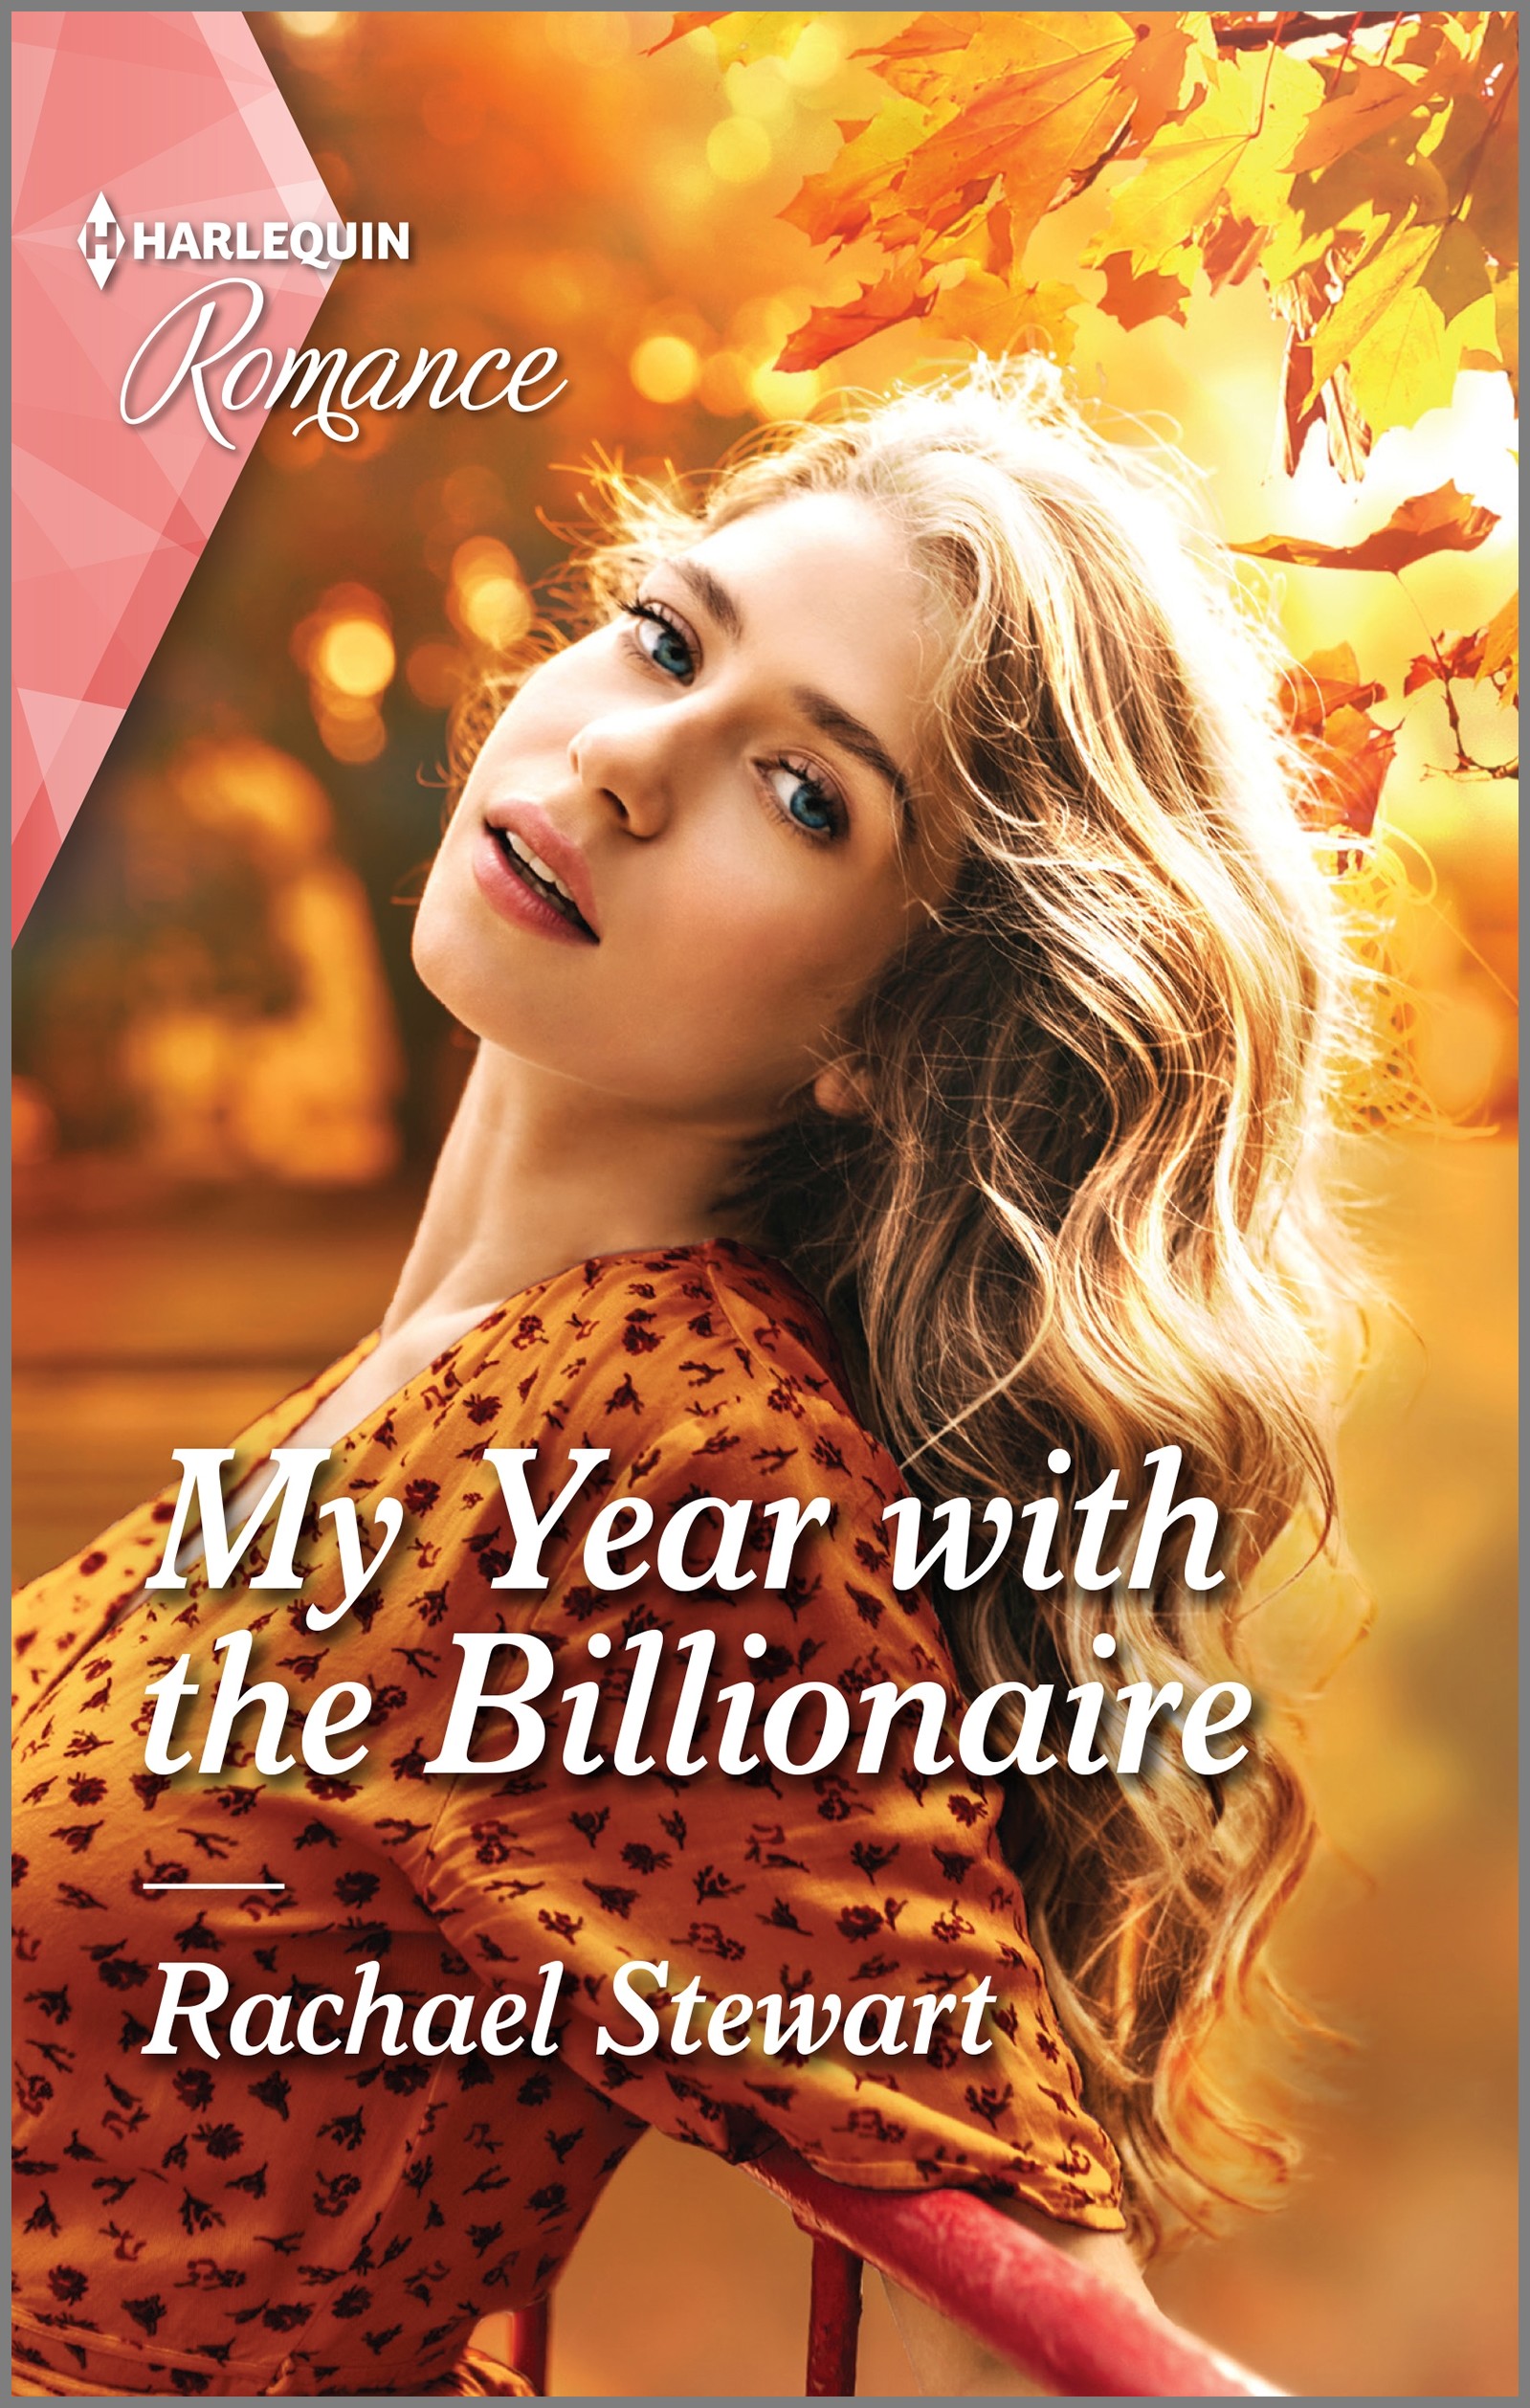 MY YEAR WITH THE BILLIONAIRE by Rachael Stewart